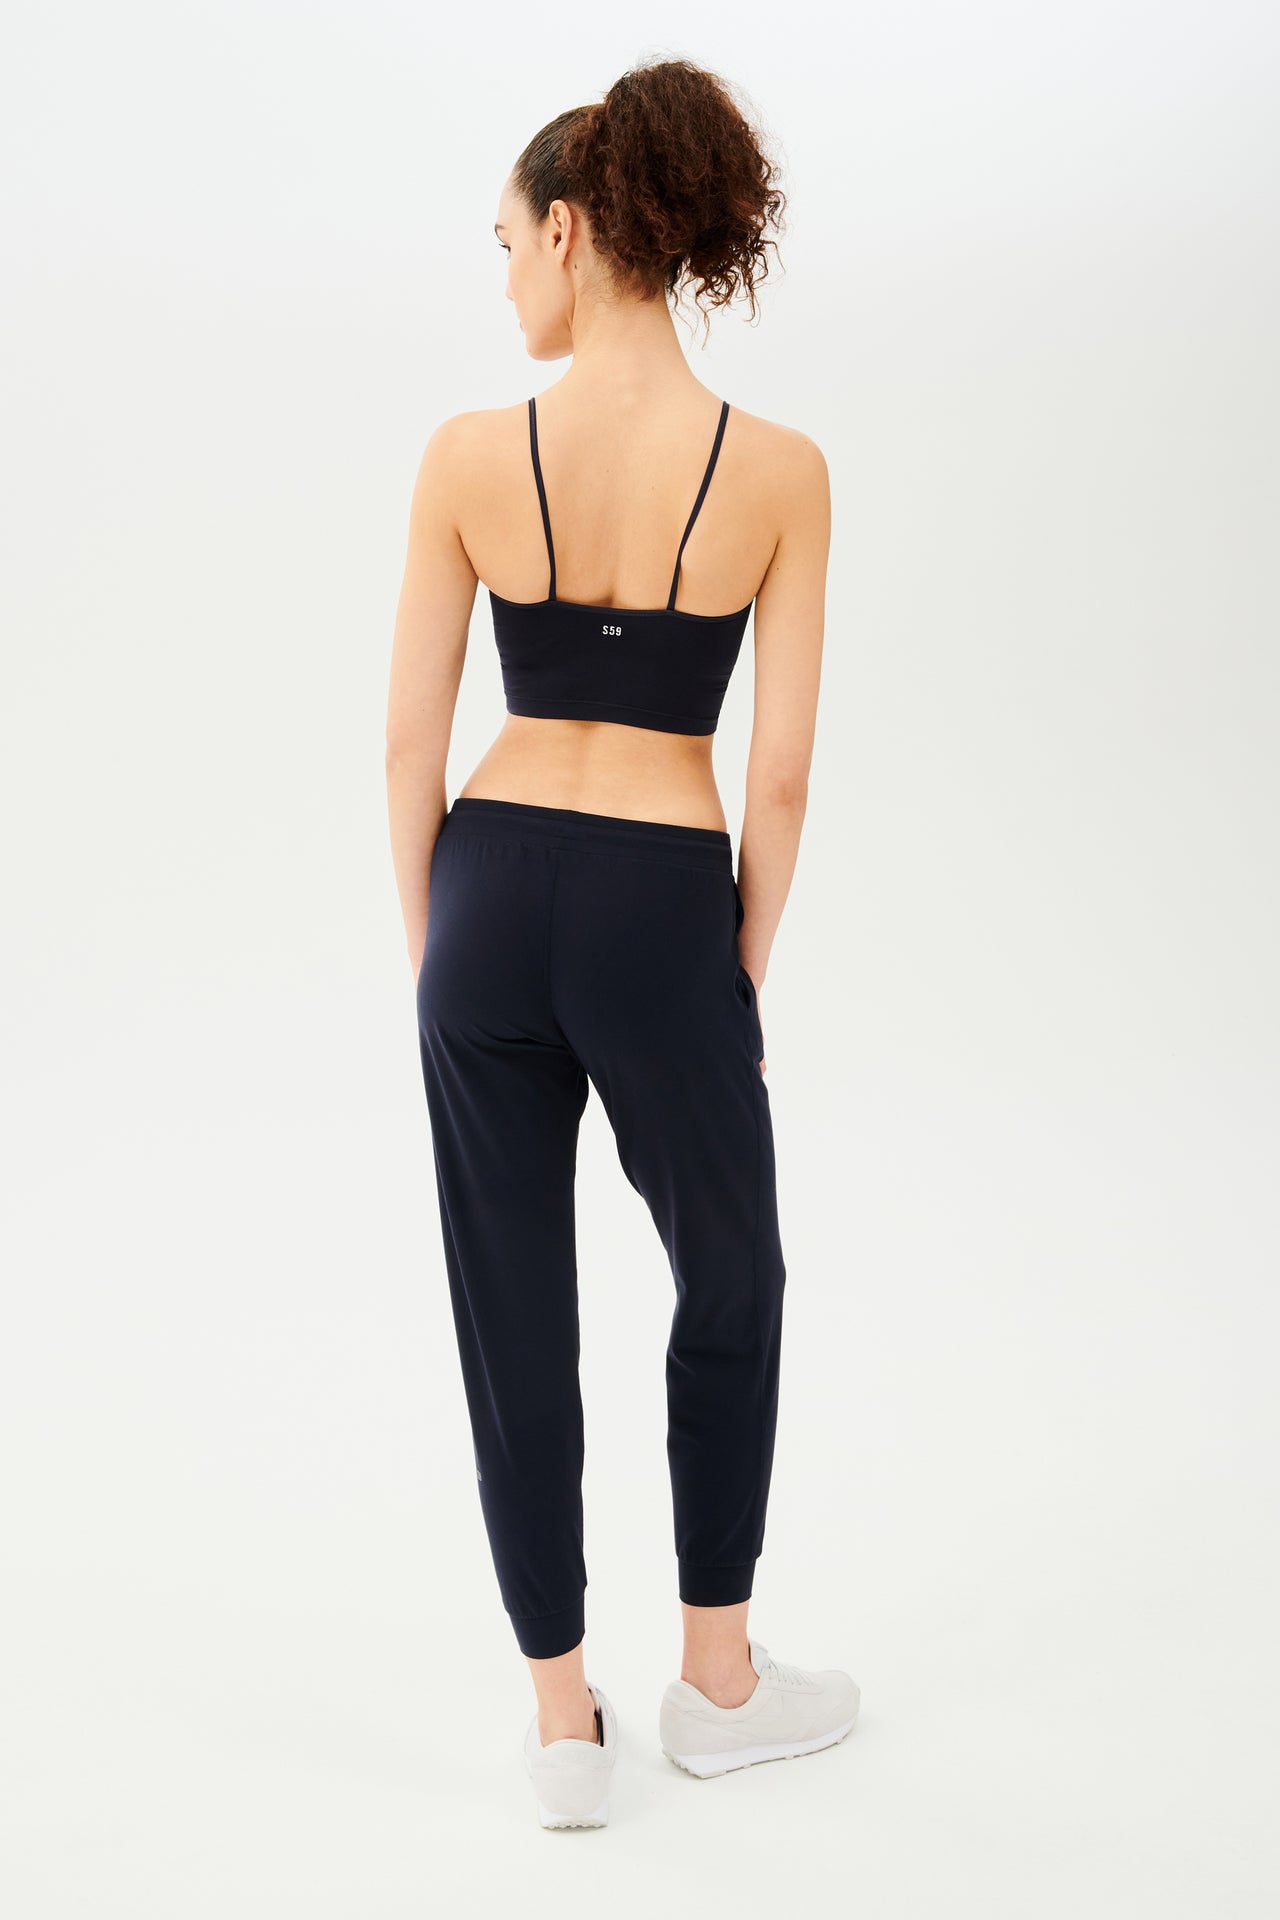 The back view of a woman wearing a Splits59 Loren Seamless Cami in Indigo and joggers.